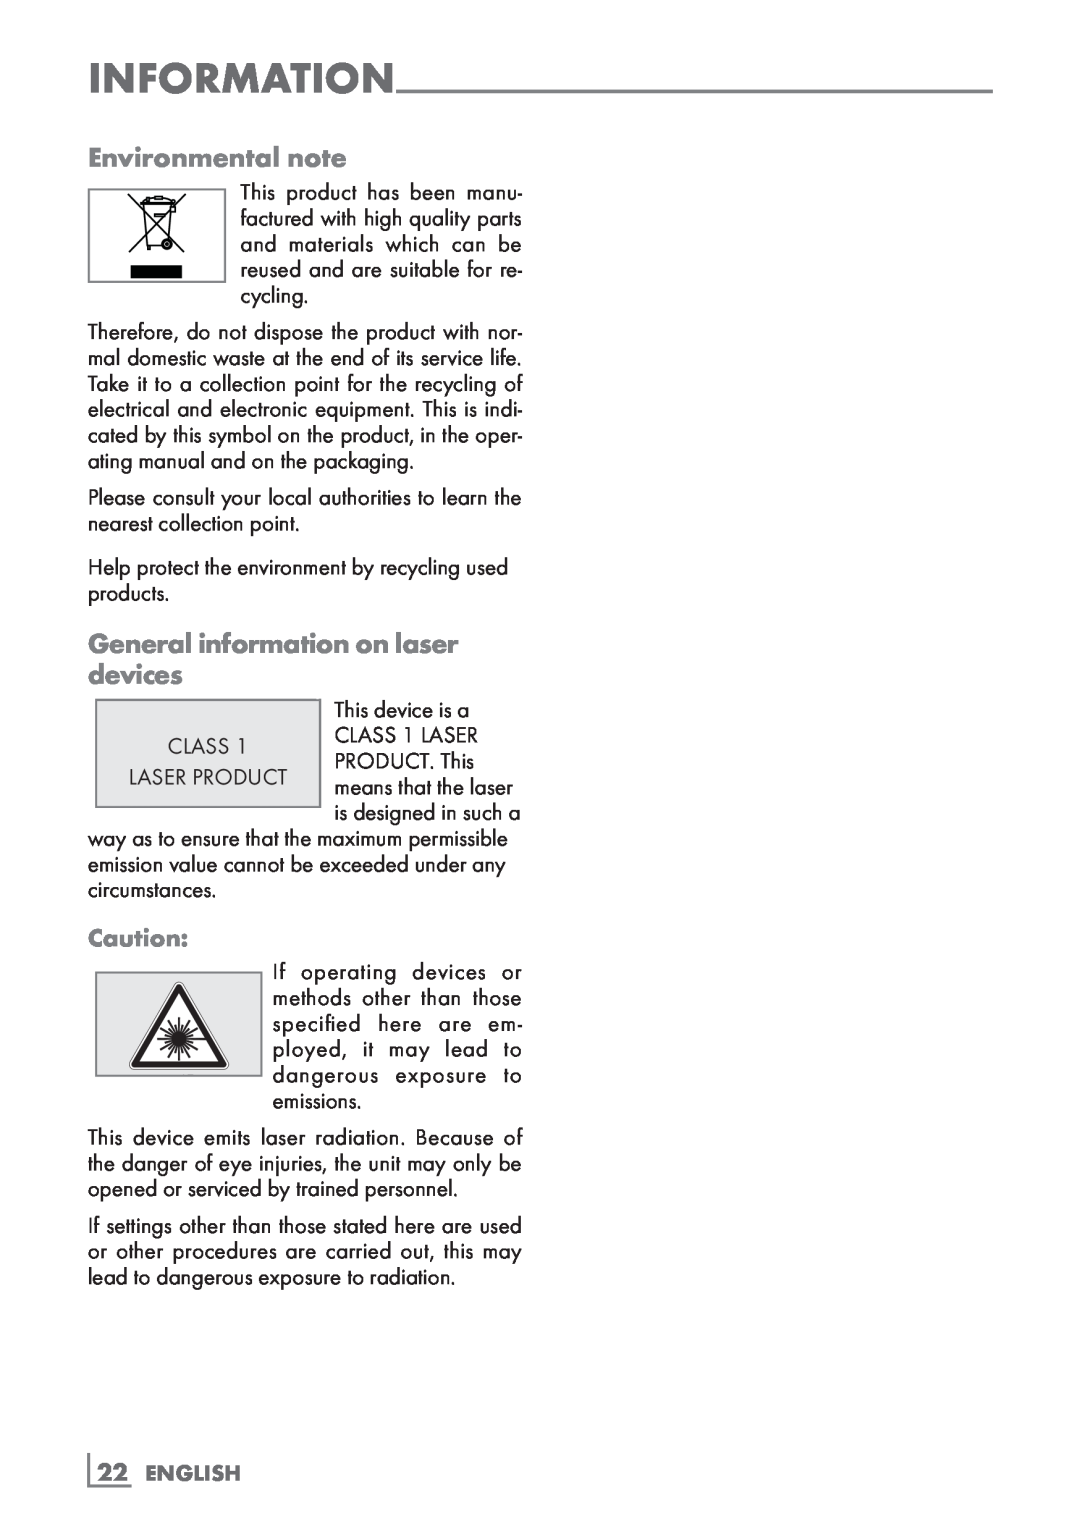 Grundig UMS 2020 manual Environmental note, General information on laser devices, 22­ ENGLISH 